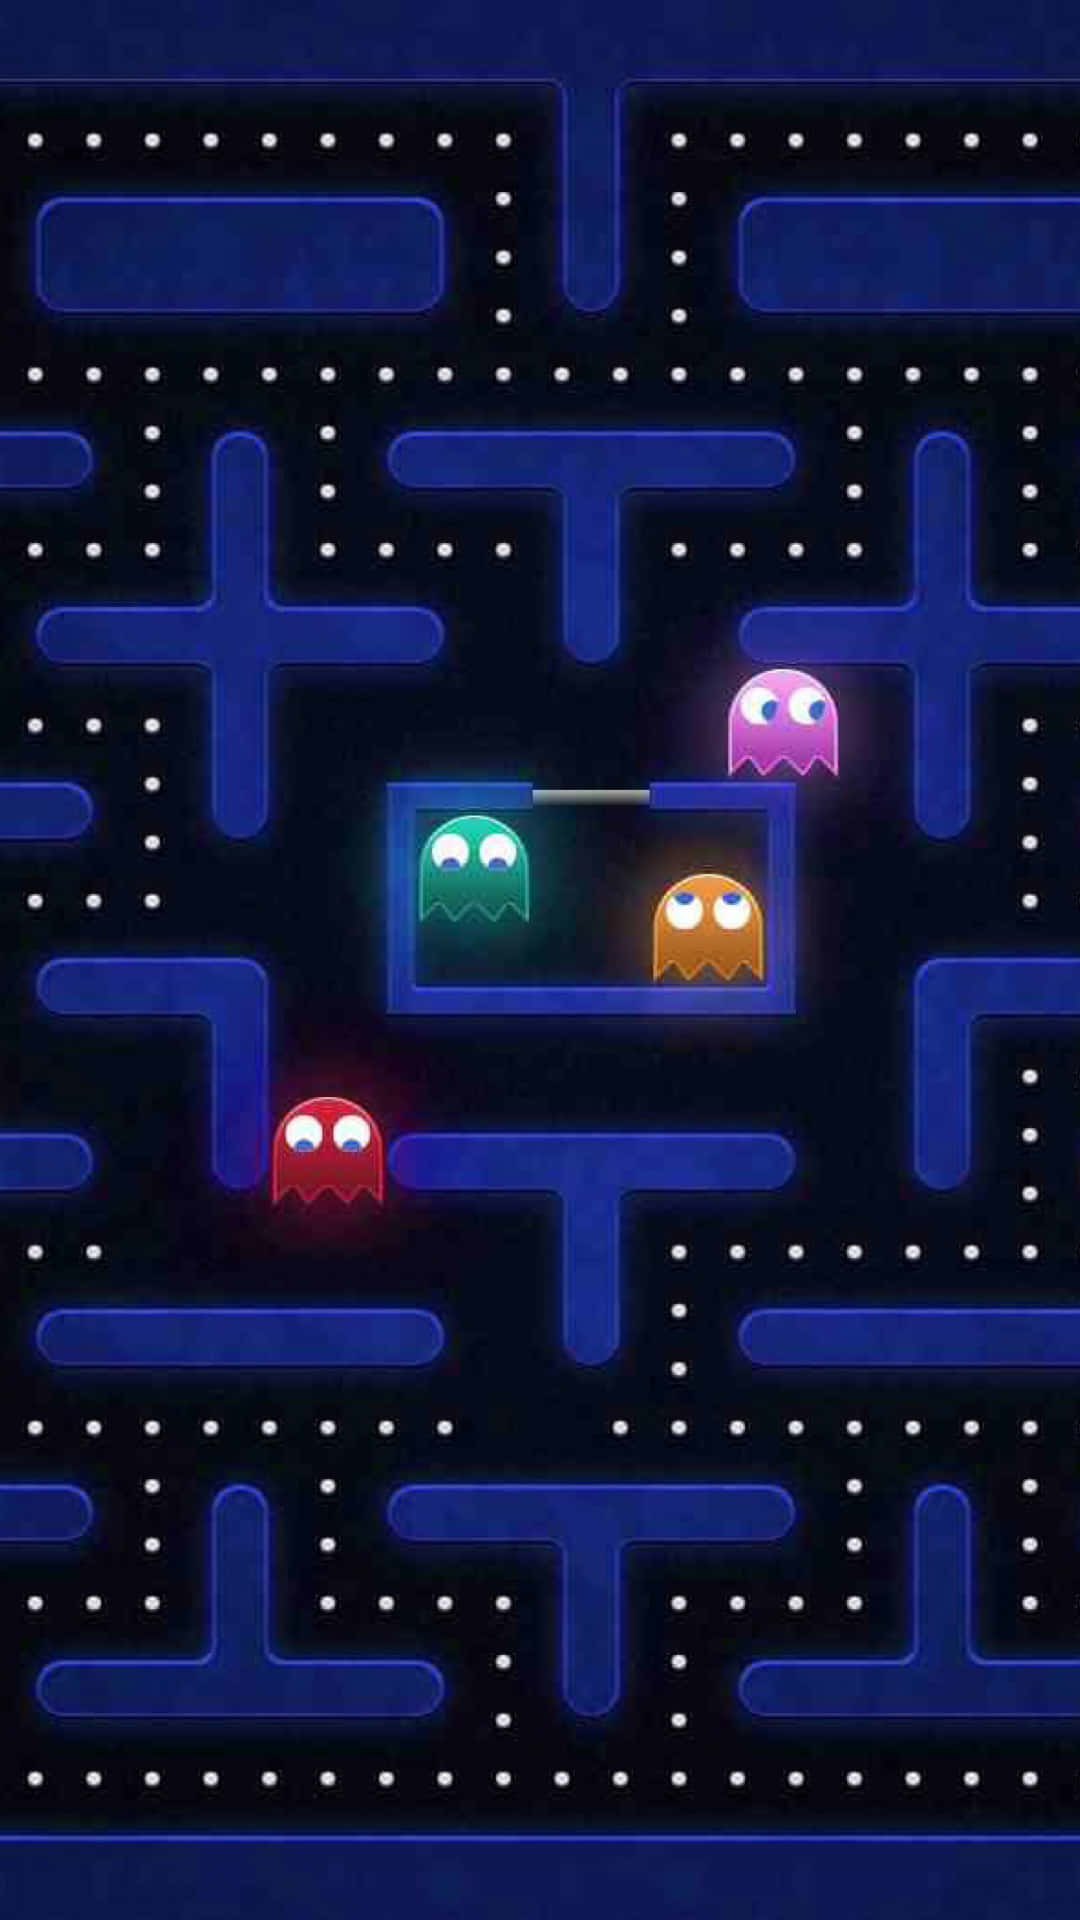 Playful Pac-Man chase scene on digital background